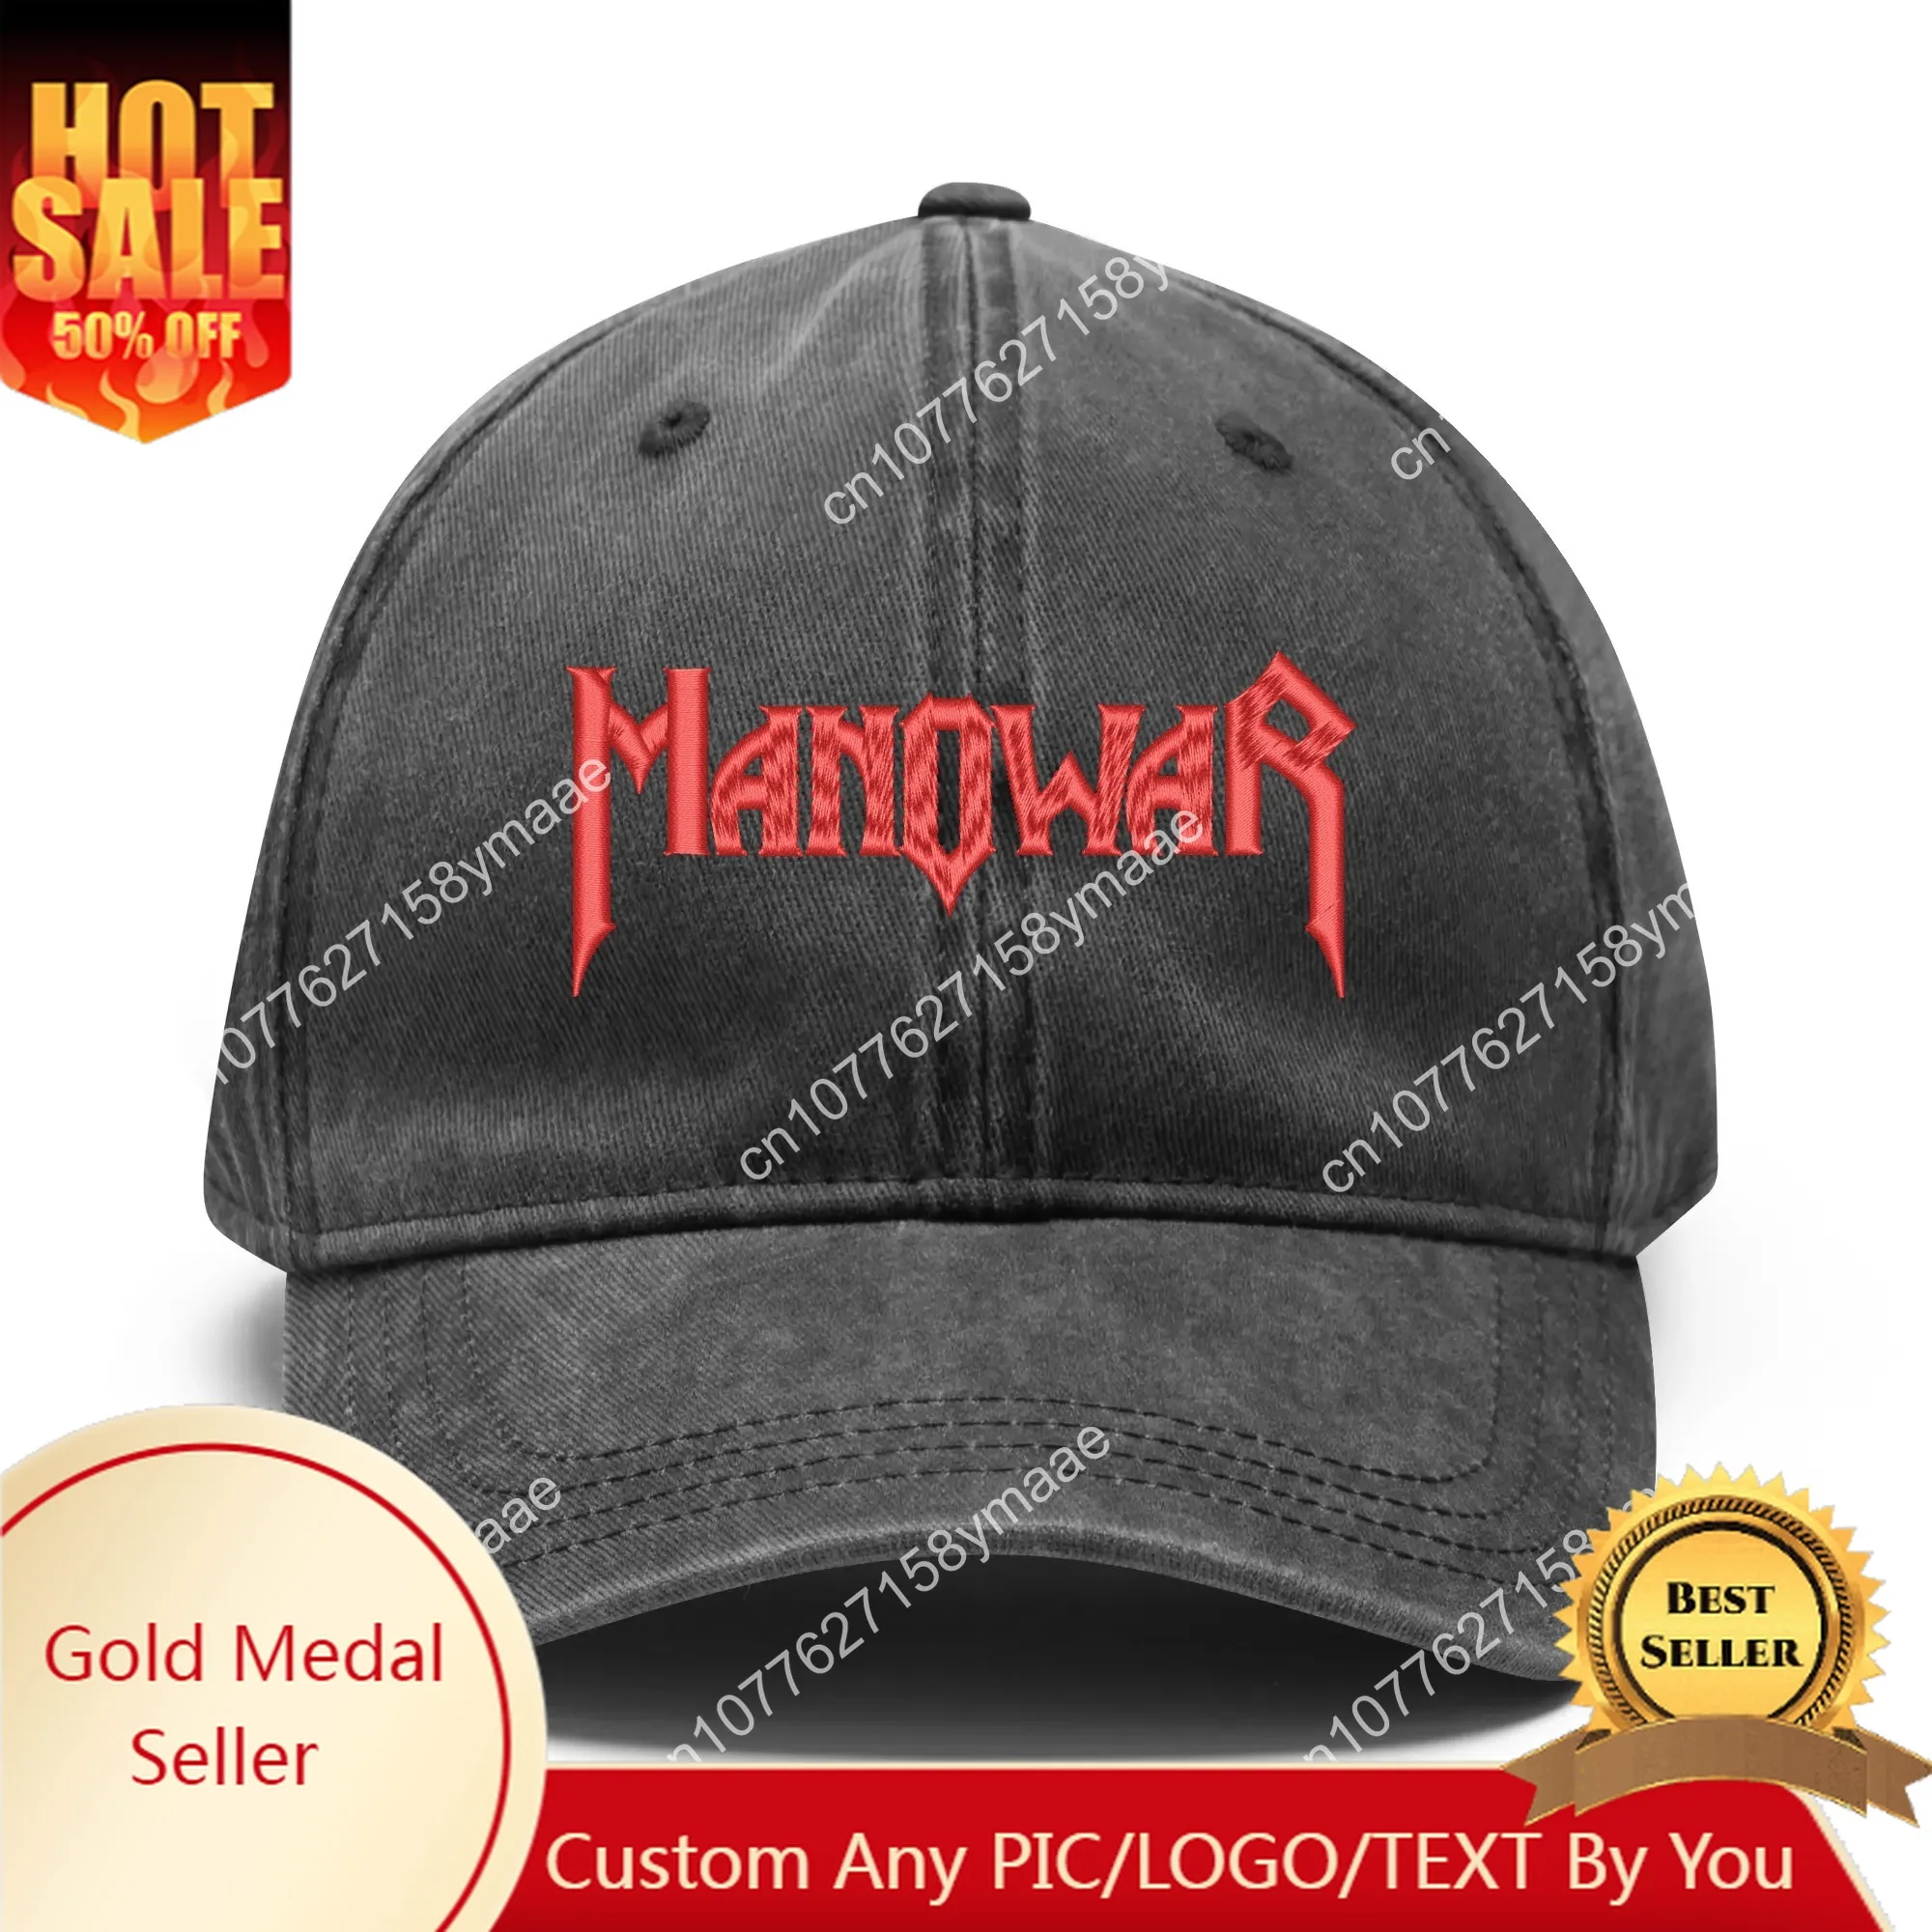 

Manowar Embroidery Hats Mens Womens Sports Baseball Hat Hip Hop Customized Made DIY Caps Personalized Text Cowboy Trucker Cap